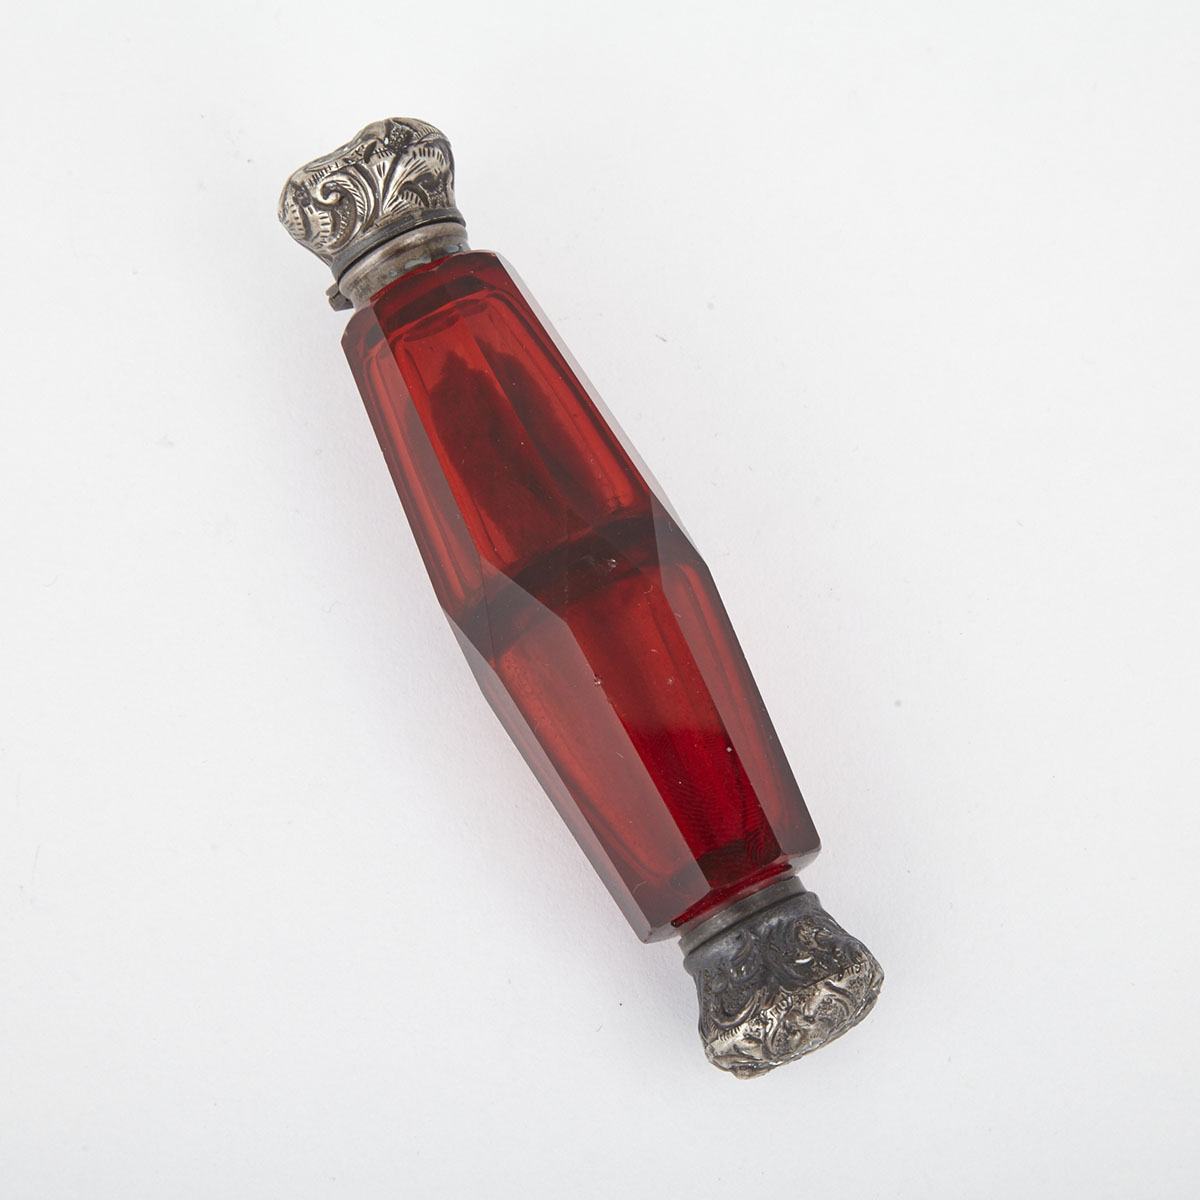 Silver Mounted Cut Cranberry Glass Double Ended Perfume Phial, mid-19th century